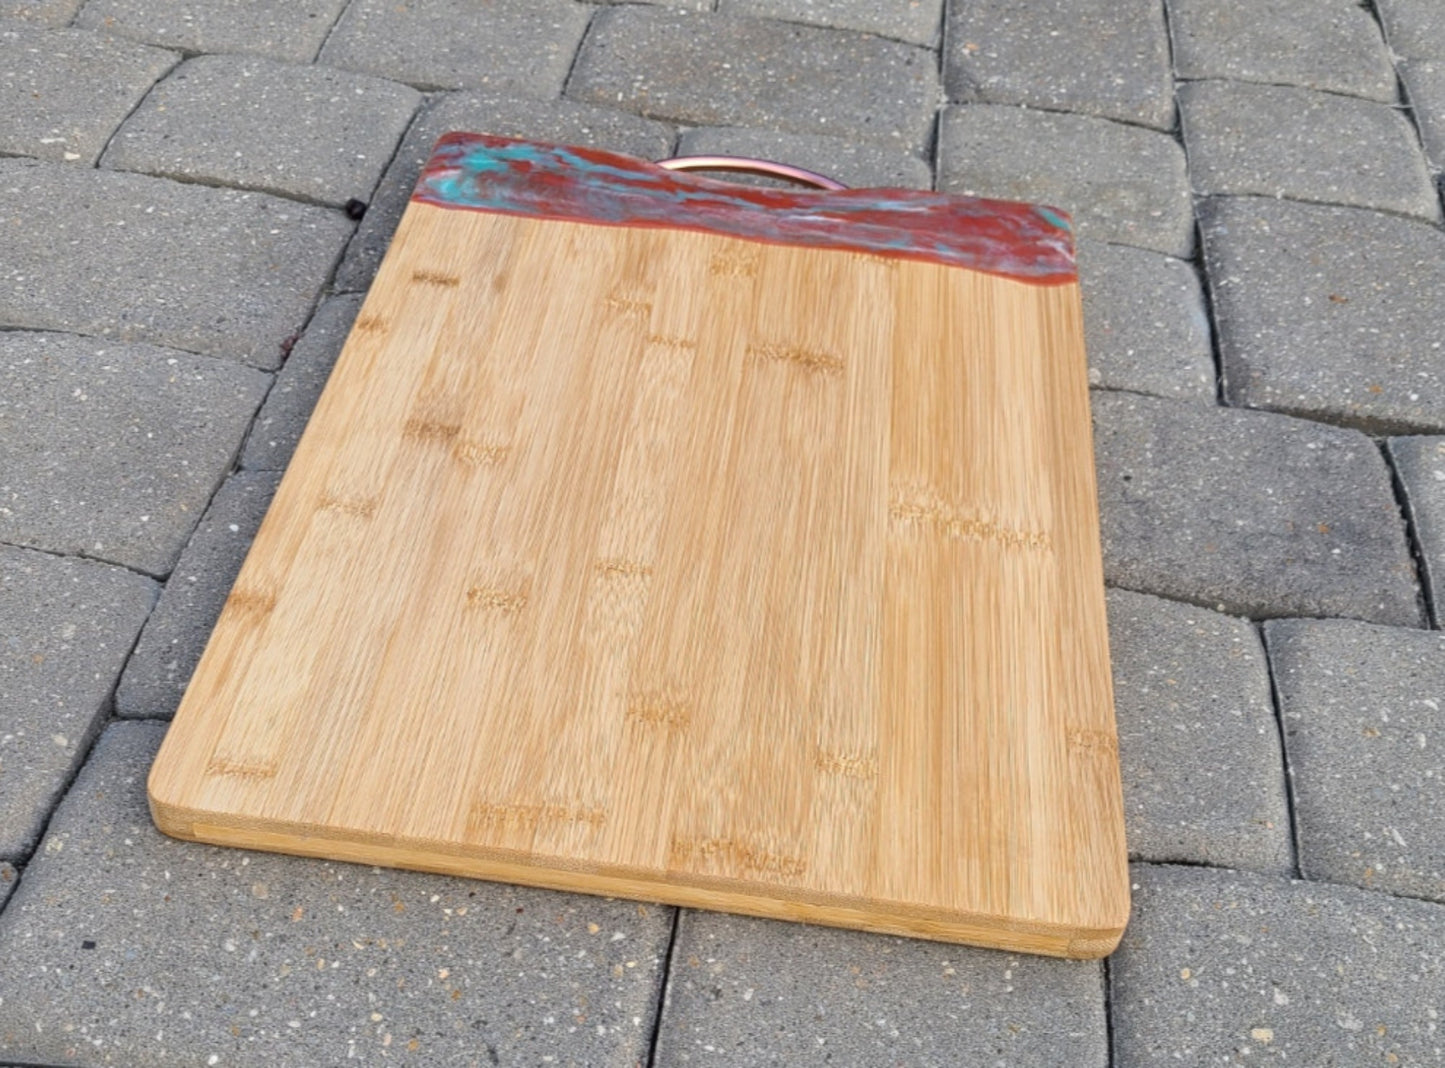 Bamboo Cutting Board With Copper Handle, Copper, Teal Resin